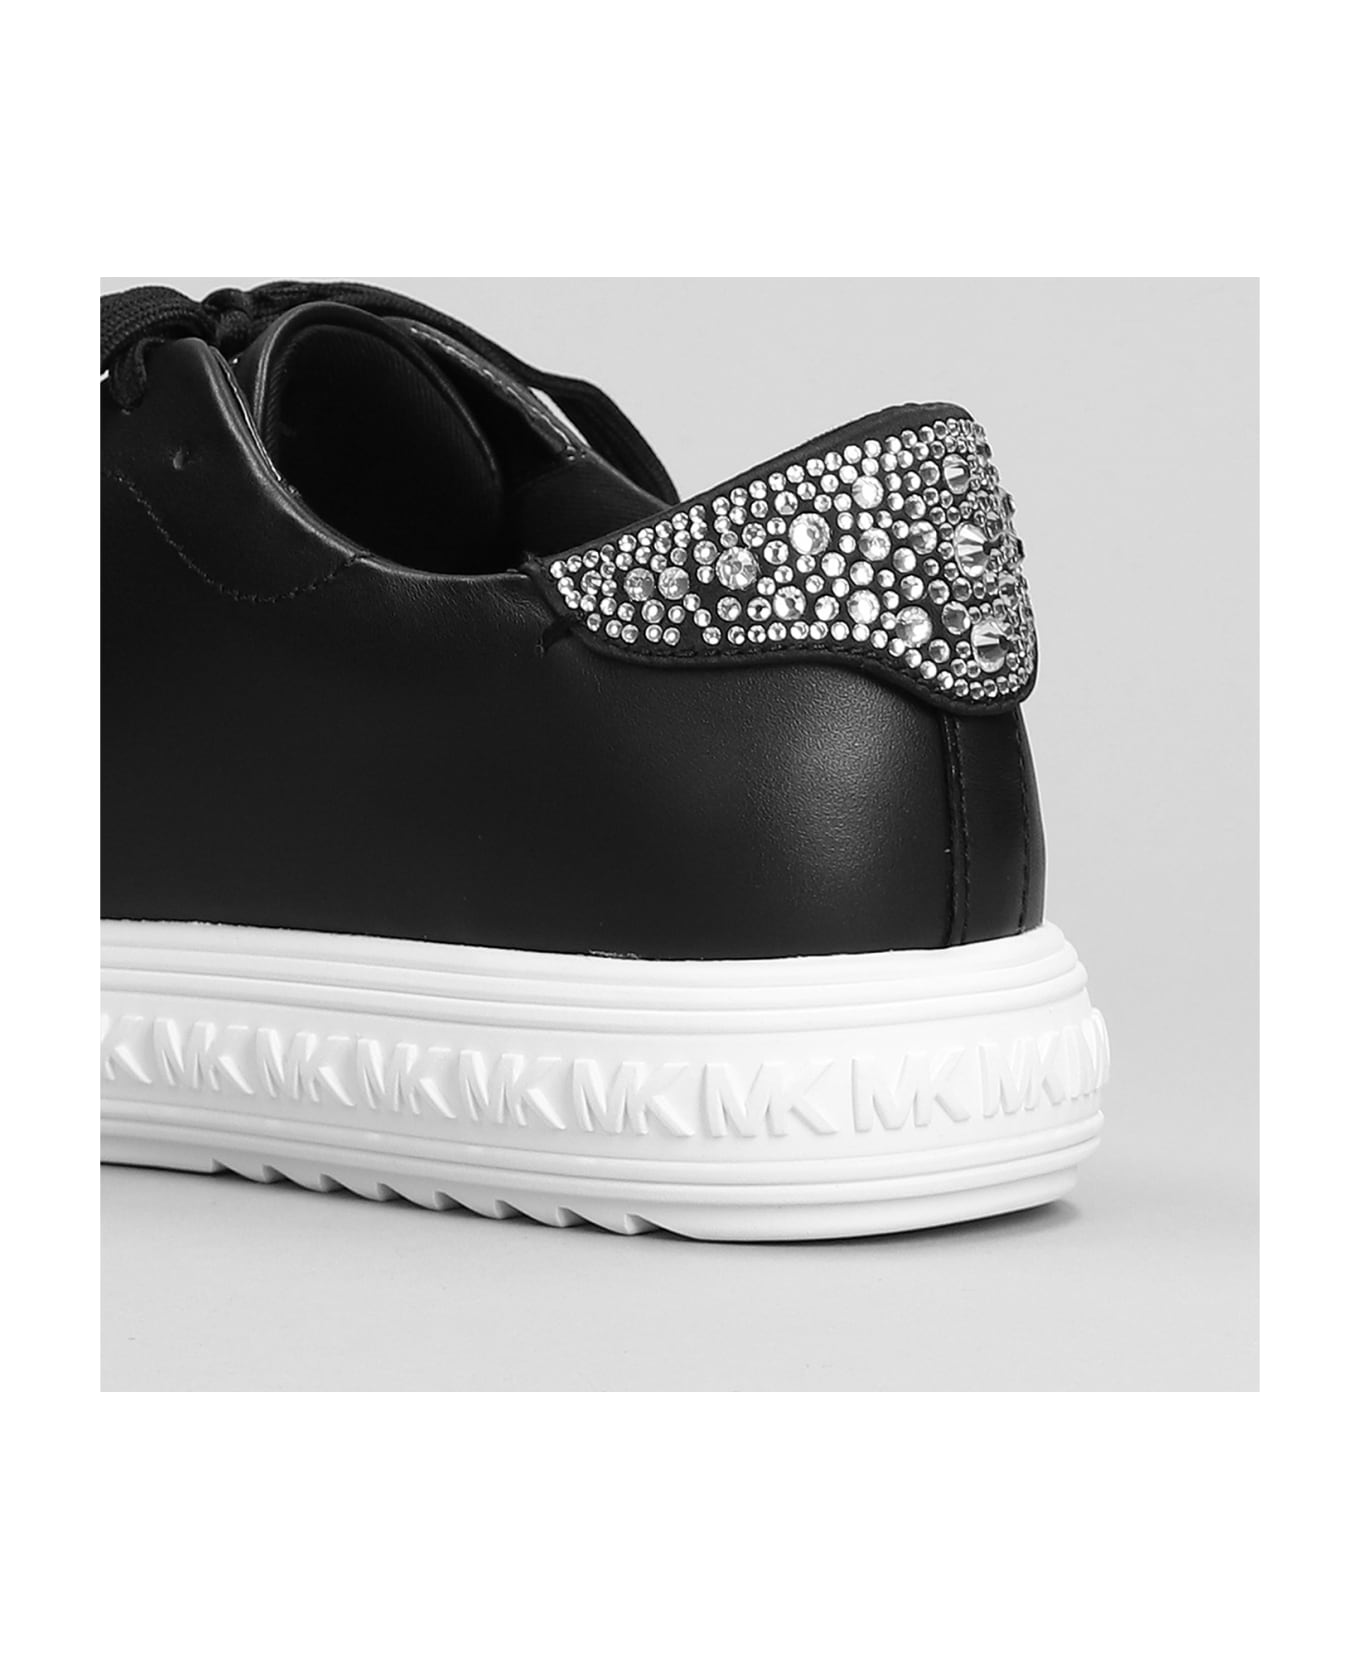 Michael Kors Grove Lake Up Sneakers In Black Leather And Fabric - black スニーカー